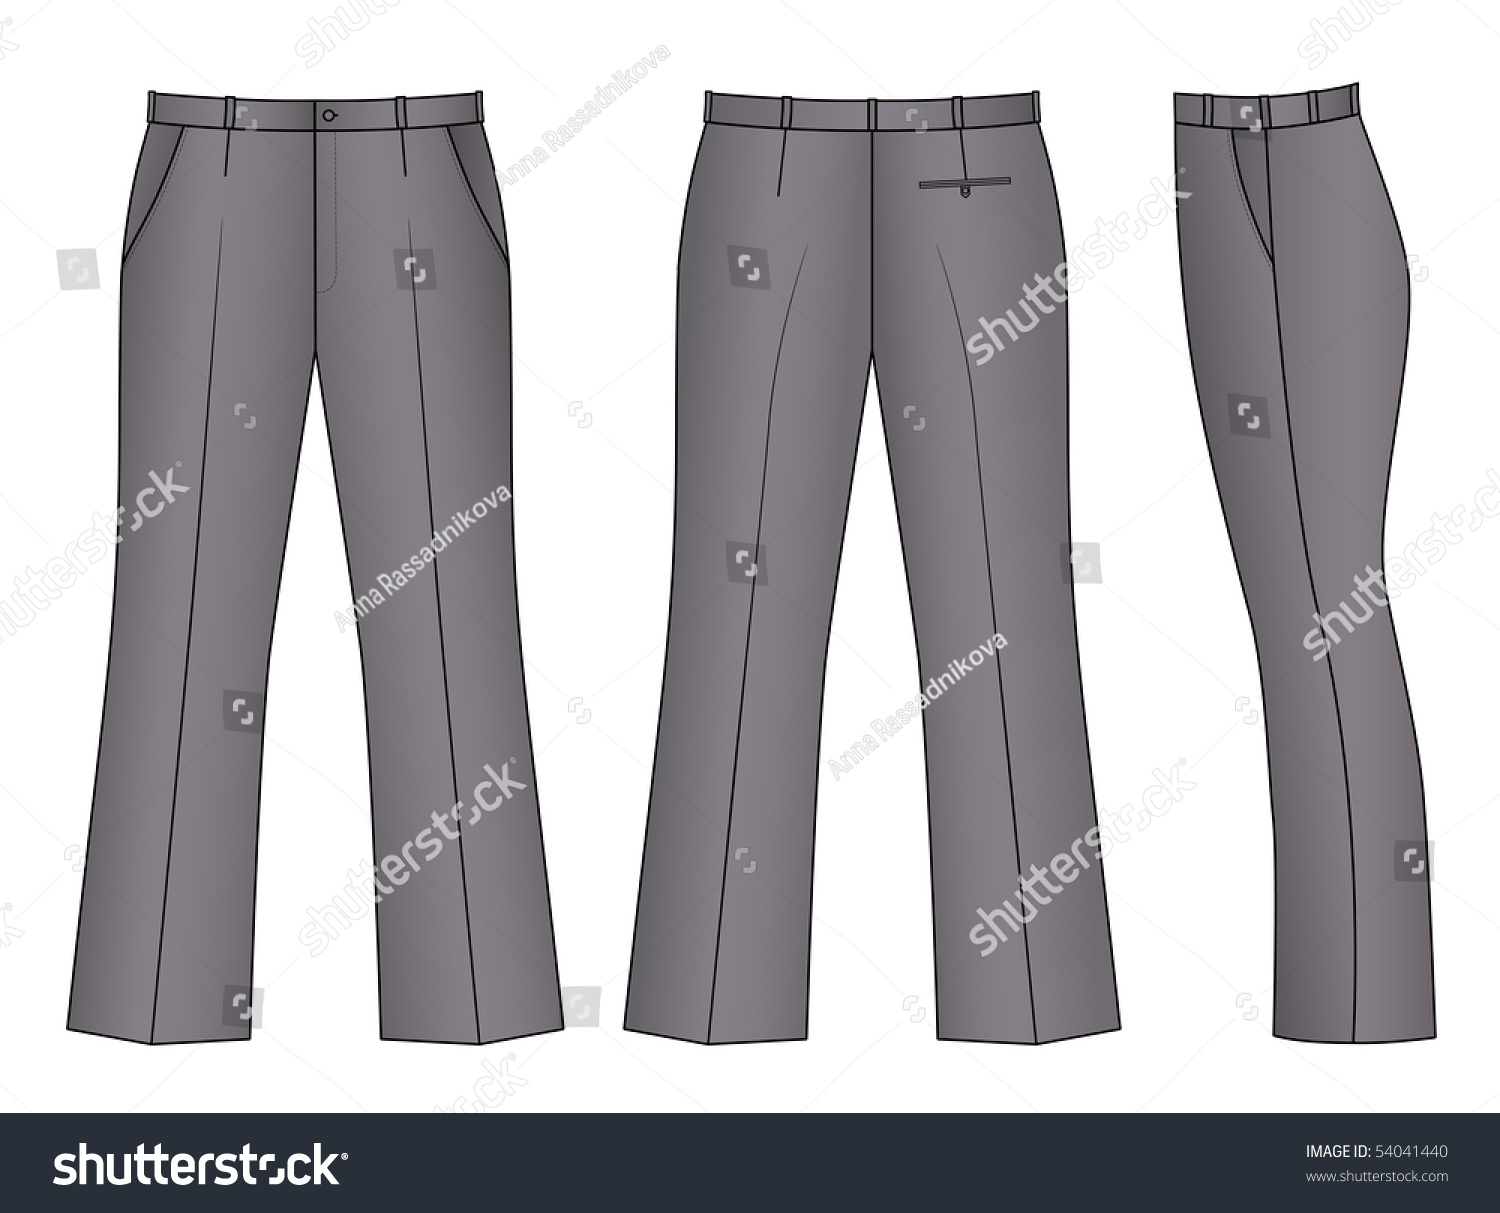 Outline Pants Vector Illustration Isolated On Stock Vector 54041440 ...